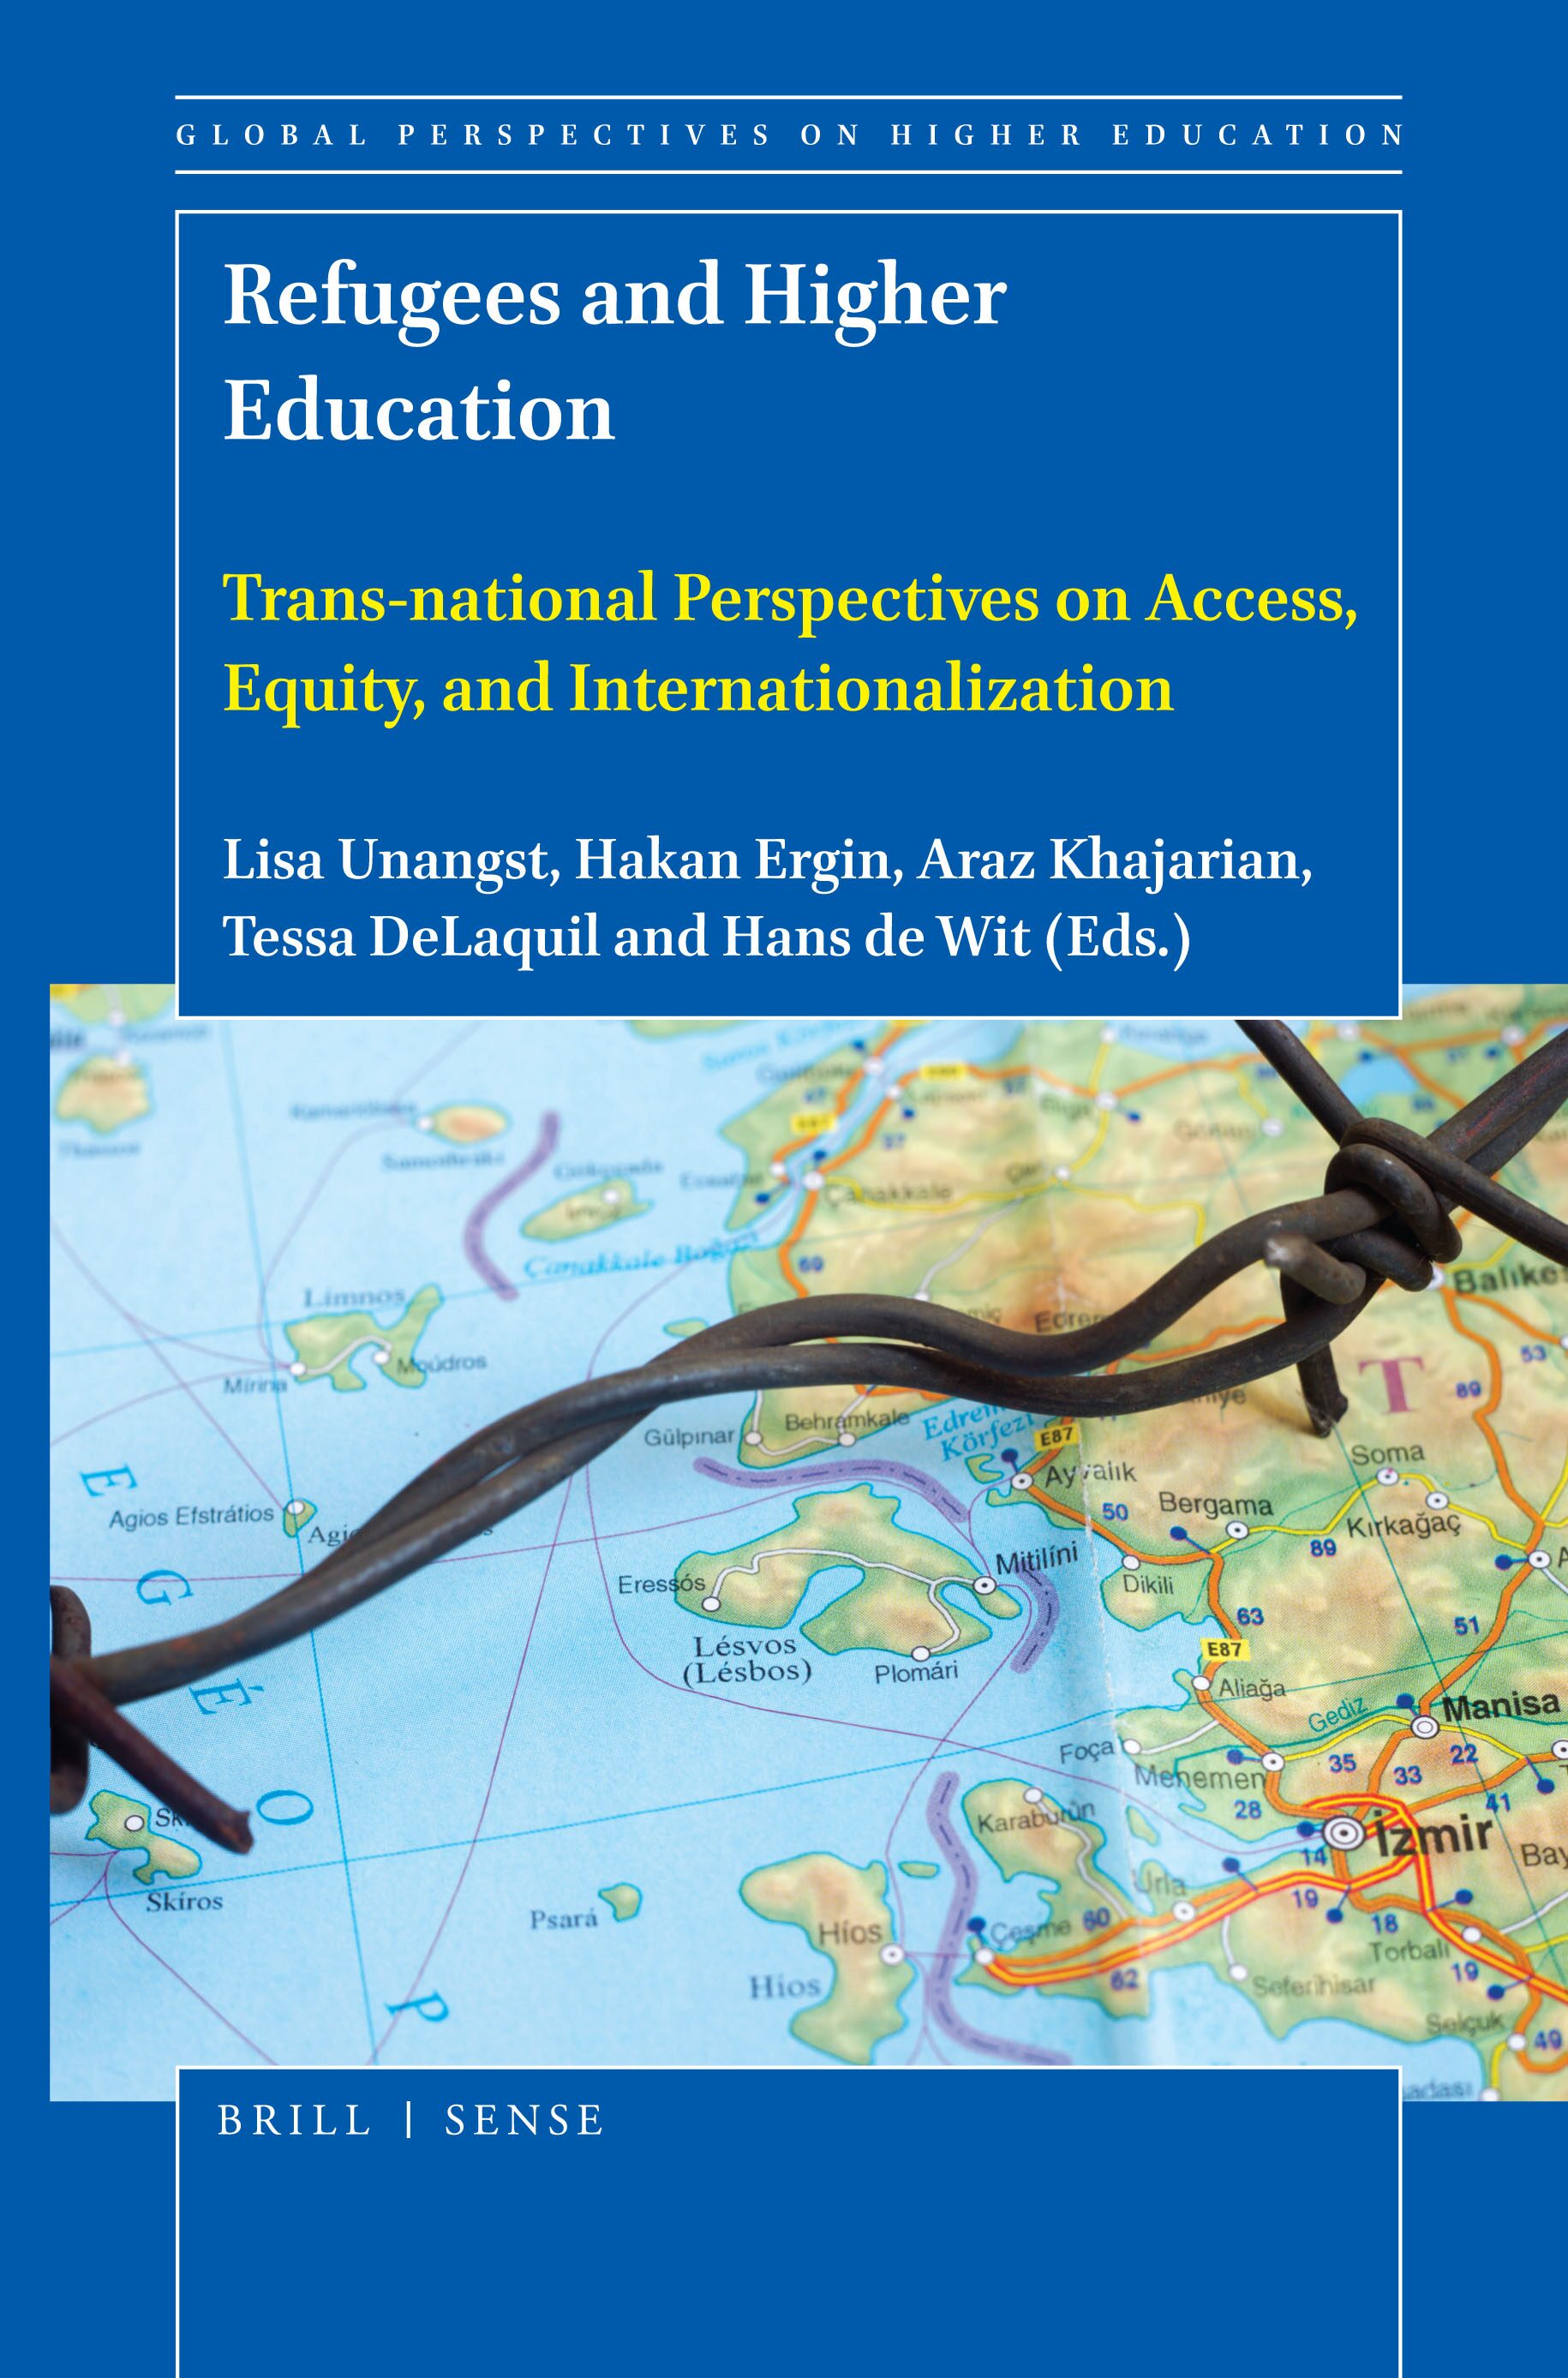 Refugees and Higher Education, book cover showing map of Turkey with barbed wire across the top